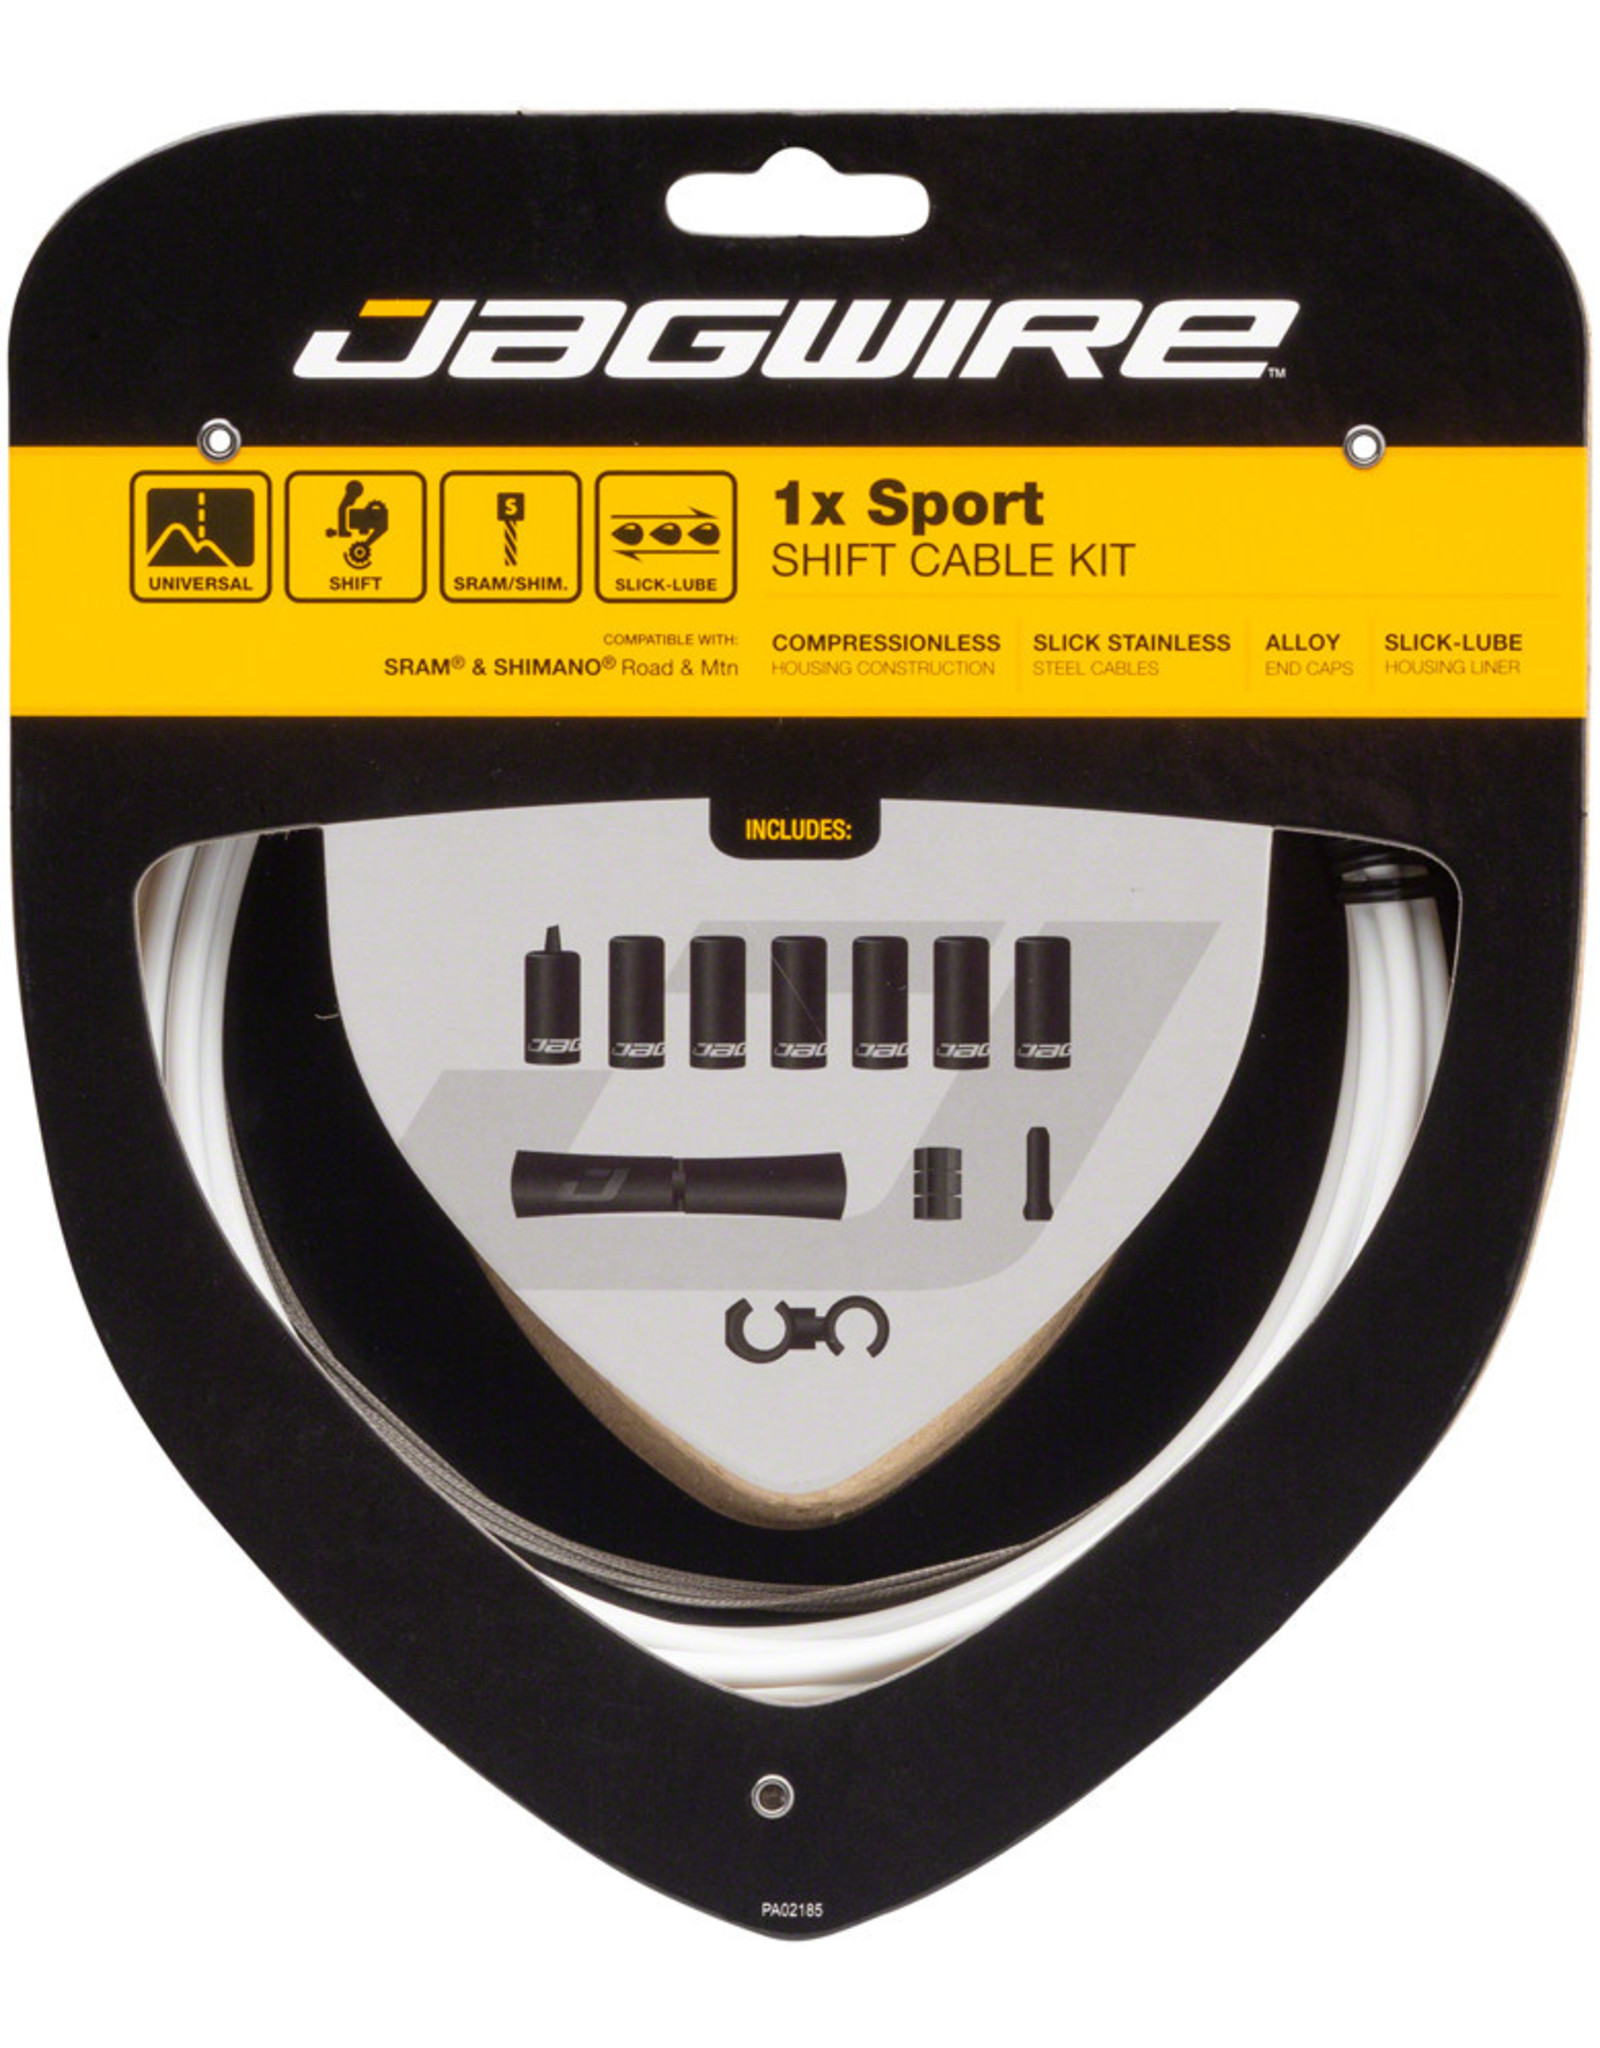 JAGWIRE Jagwire 1x Sport Shift Cable Kit for SRAM/Shimano